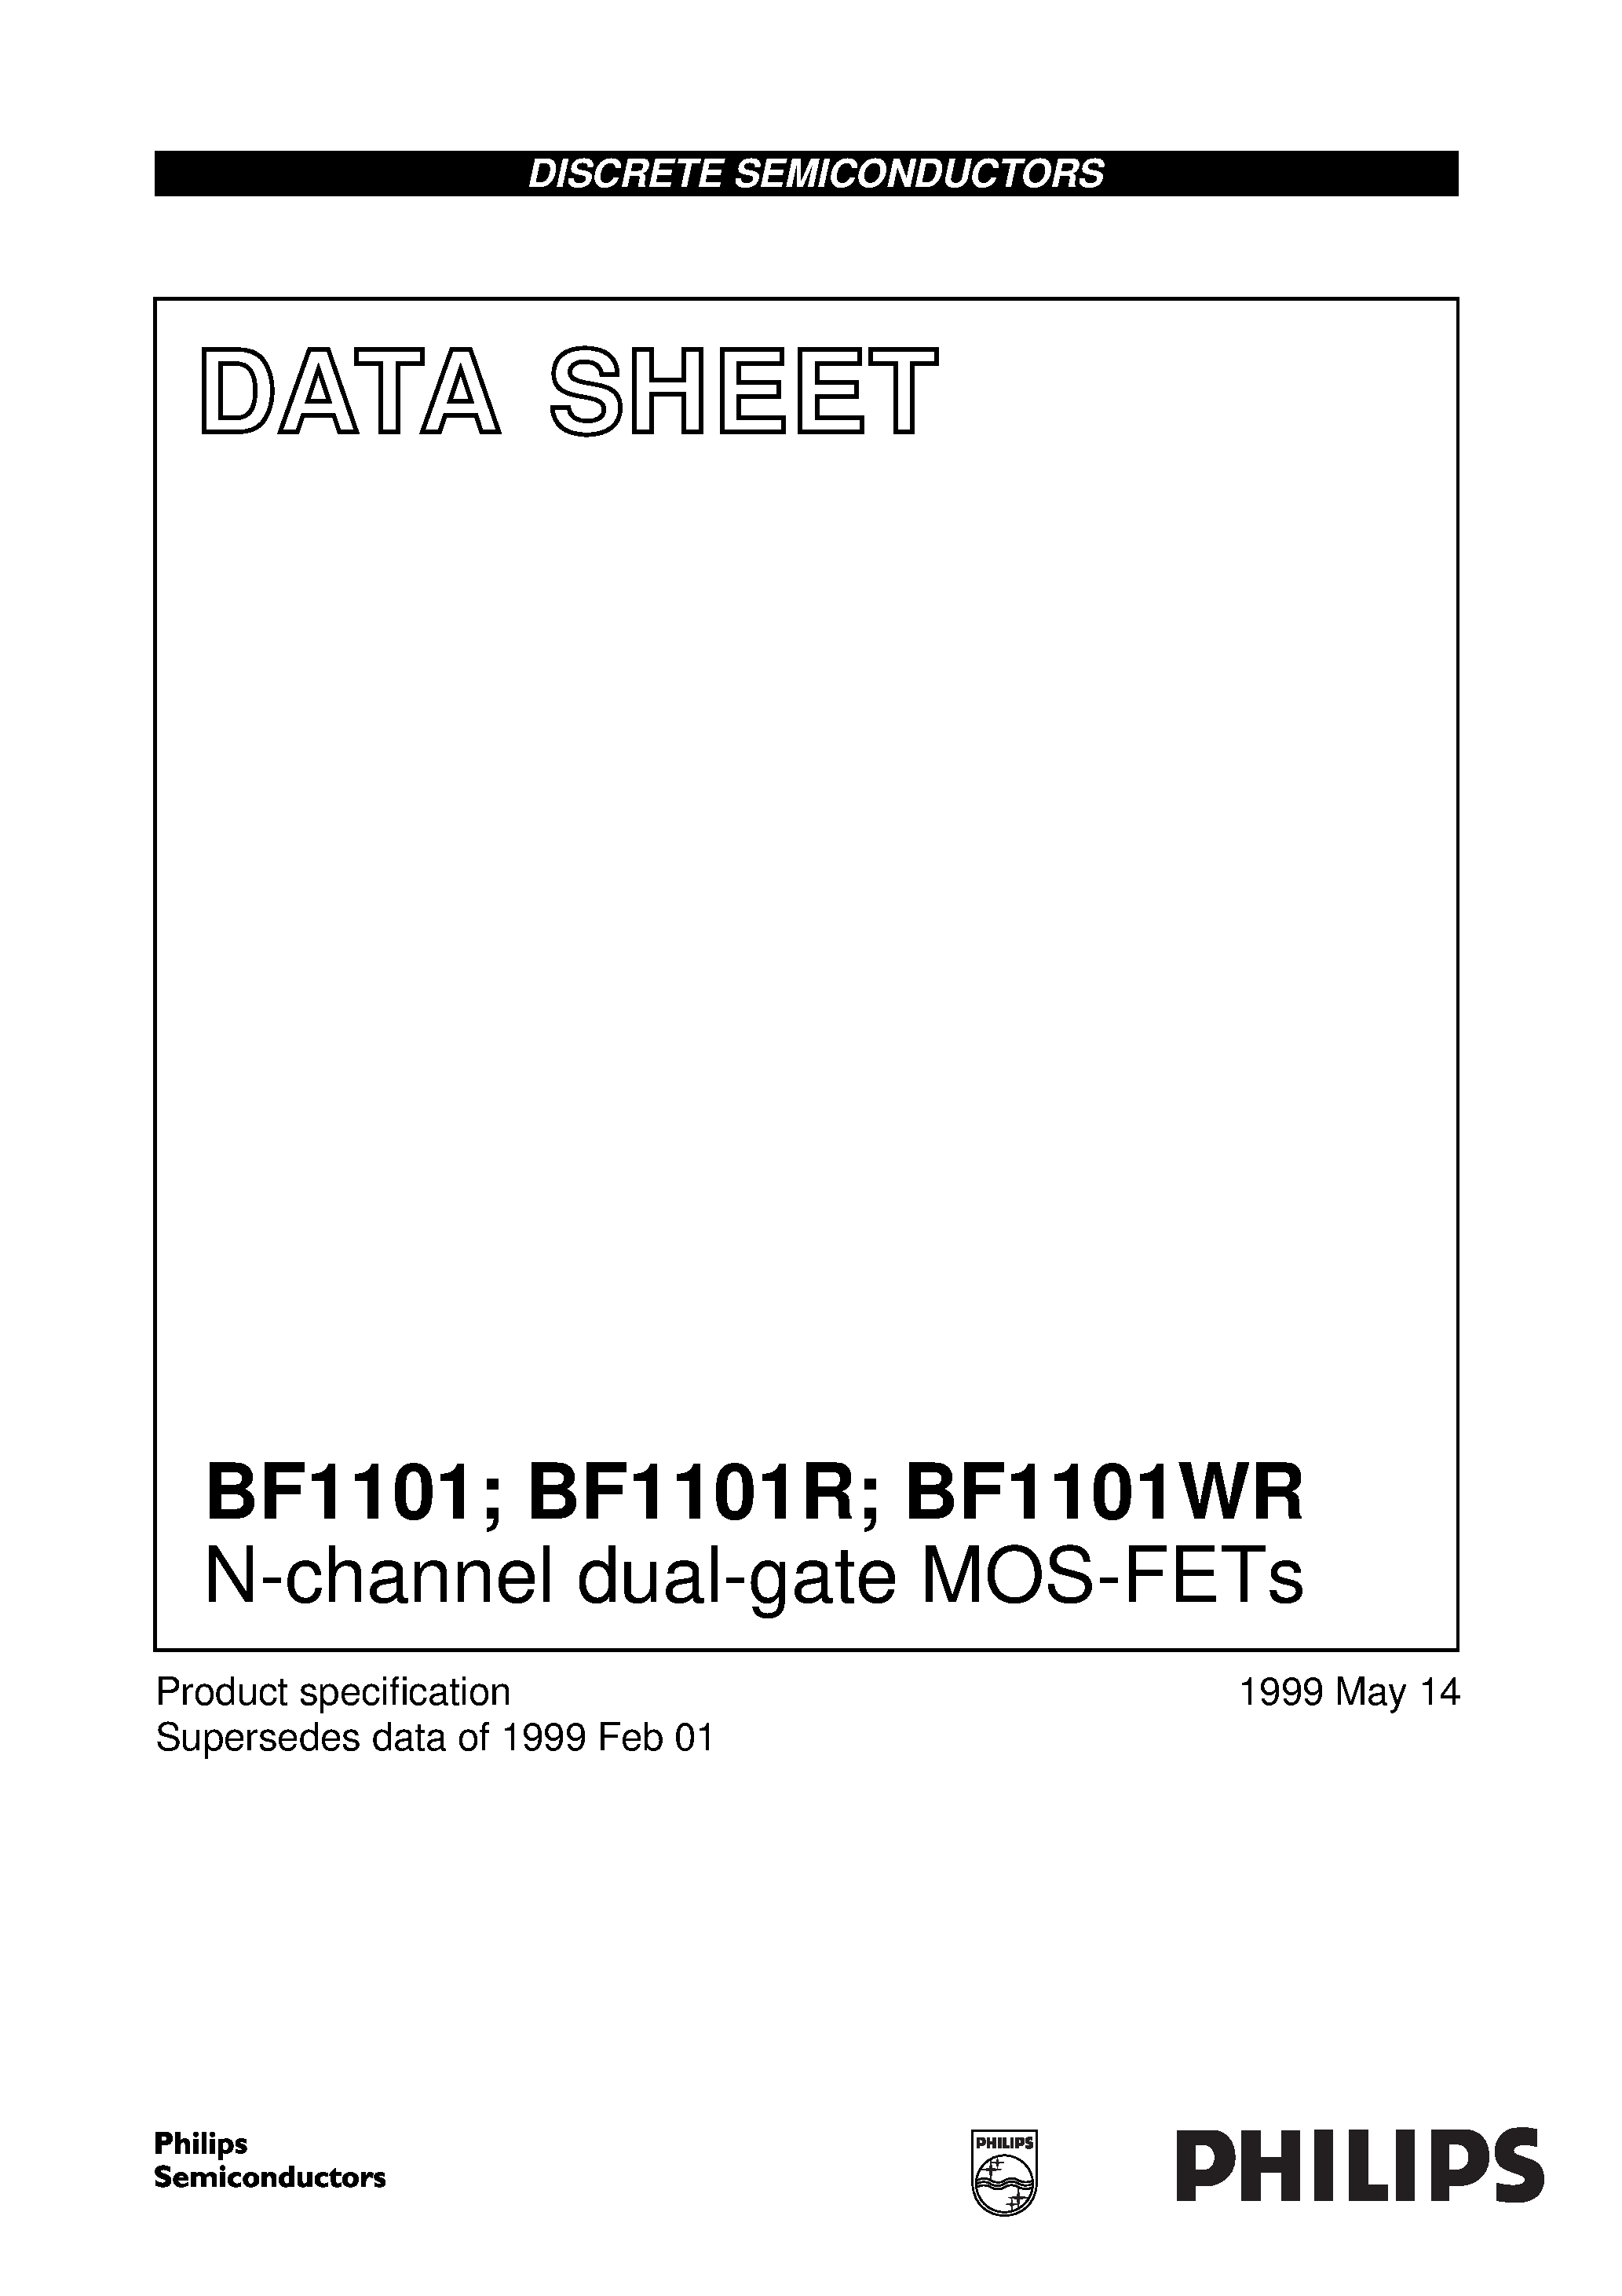 Datasheet BF1101 - N-channel dual-gate MOS-FETs page 1